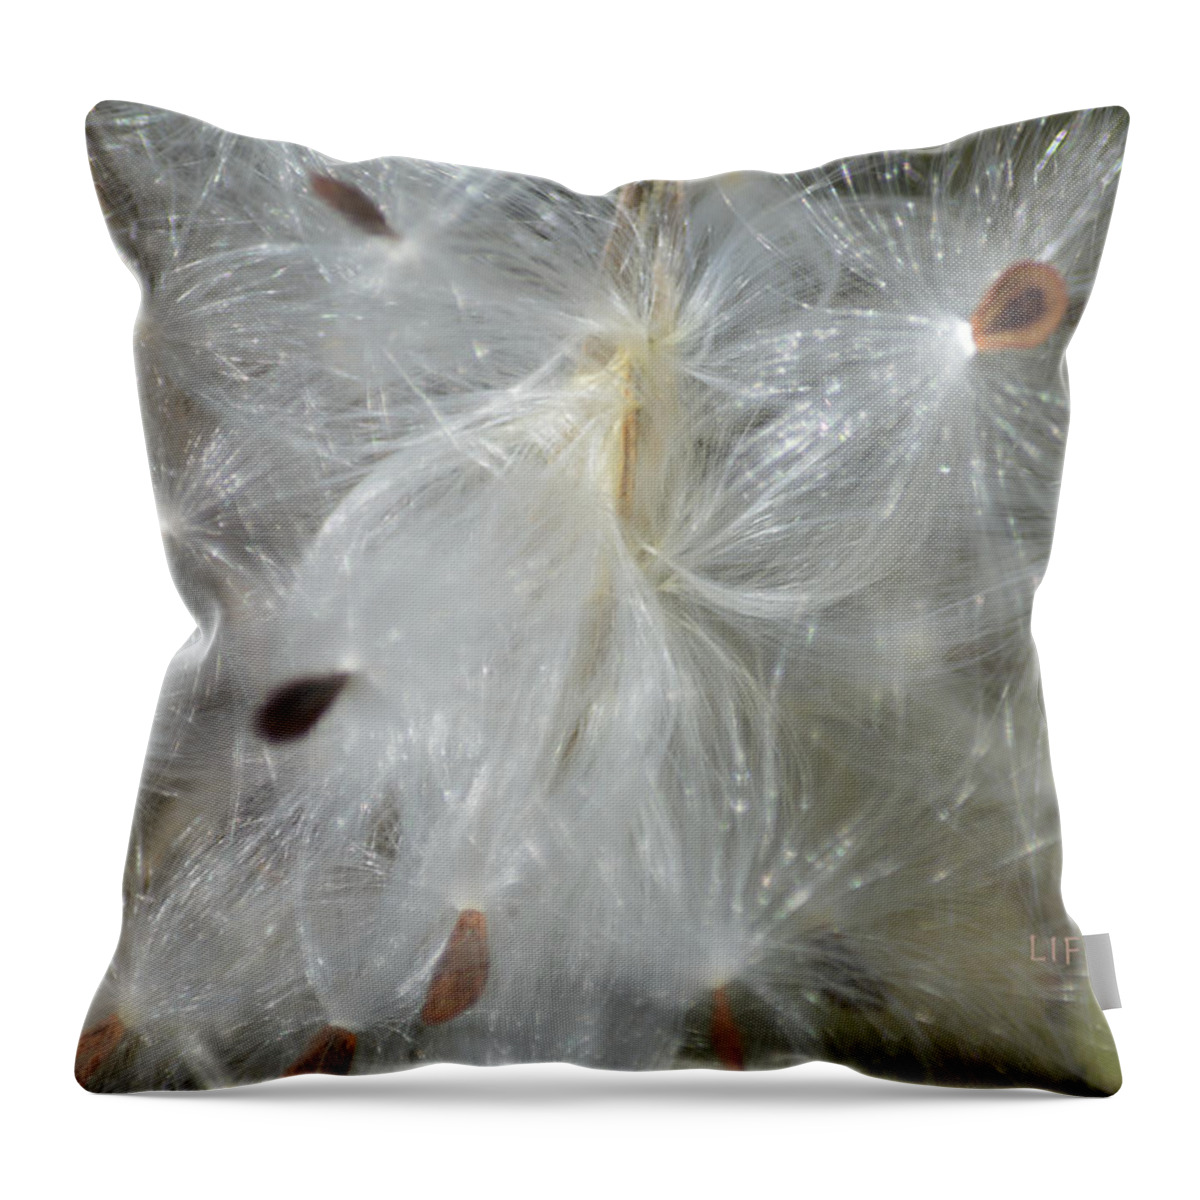 Nature Throw Pillow featuring the digital art Life Cycles by Lena Wilhite